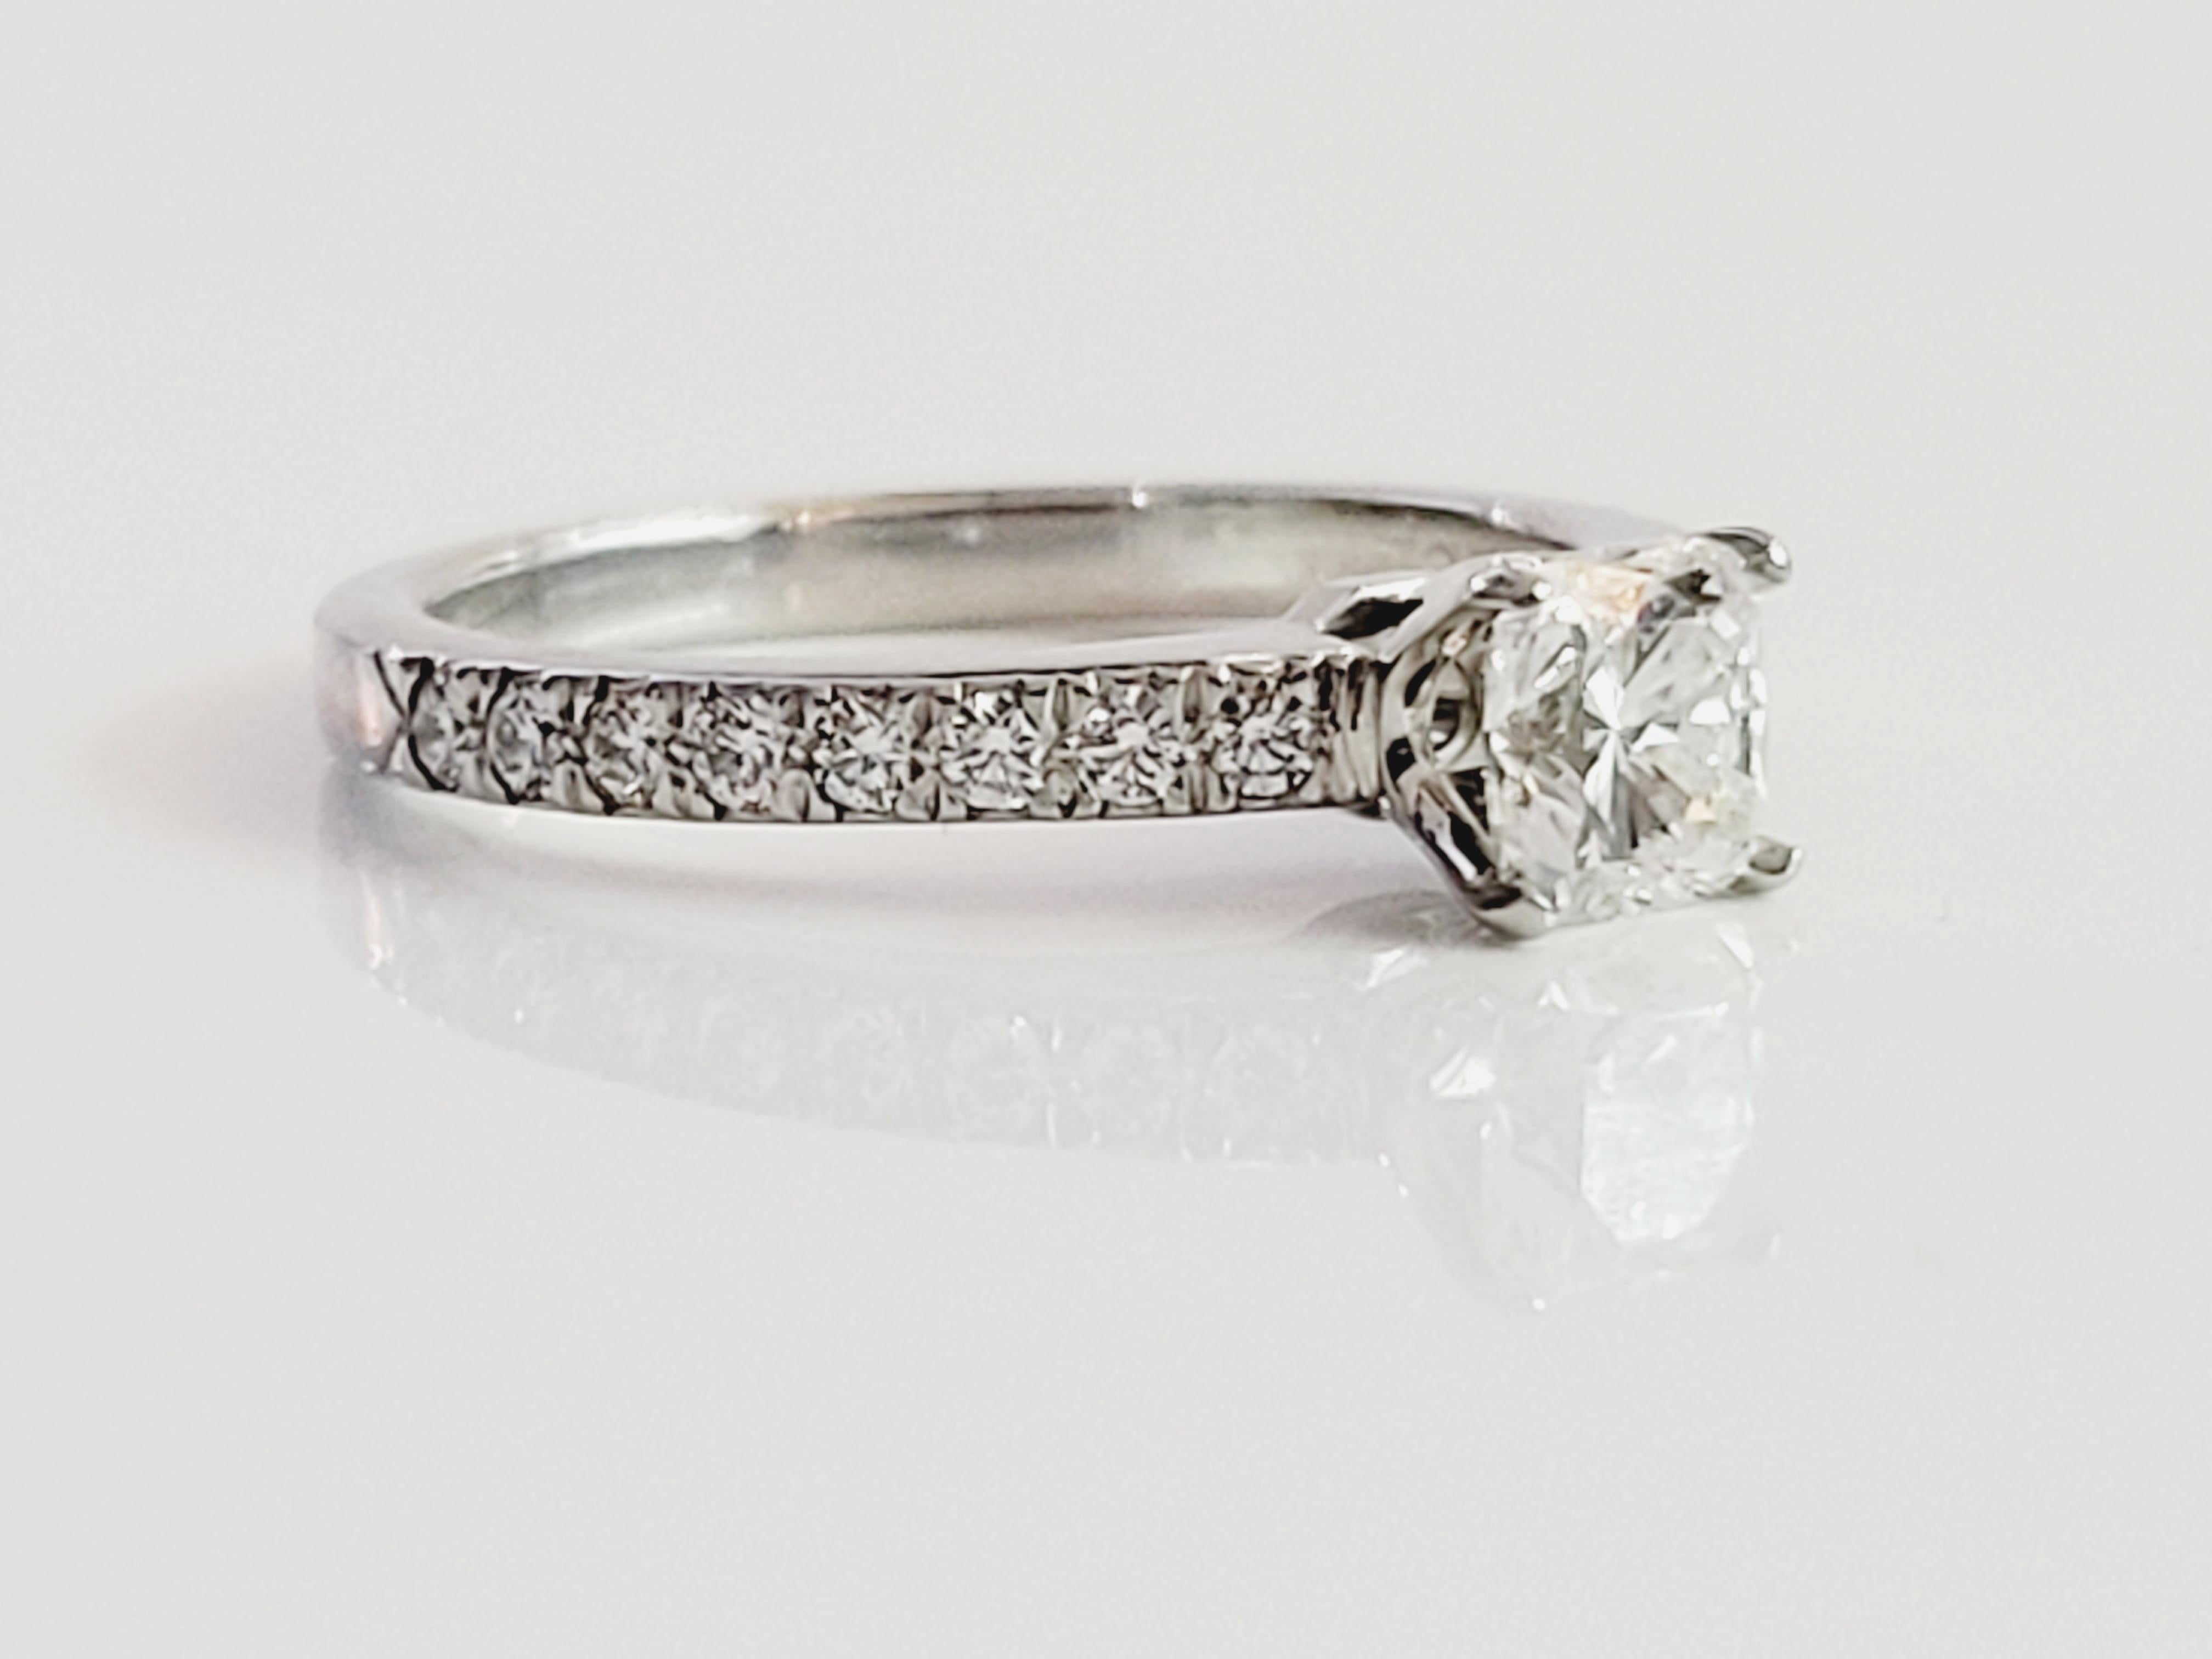 Brand Tiffany & co 
Type ring
Gender women 
Condition pre-owned
Ring size 4.5
Ring weight 3.7gr
Material platinum
Metal purity 950
Main stone diamond 0.47ct
Clarity VS1
Diamond color H
Retail price:$6000